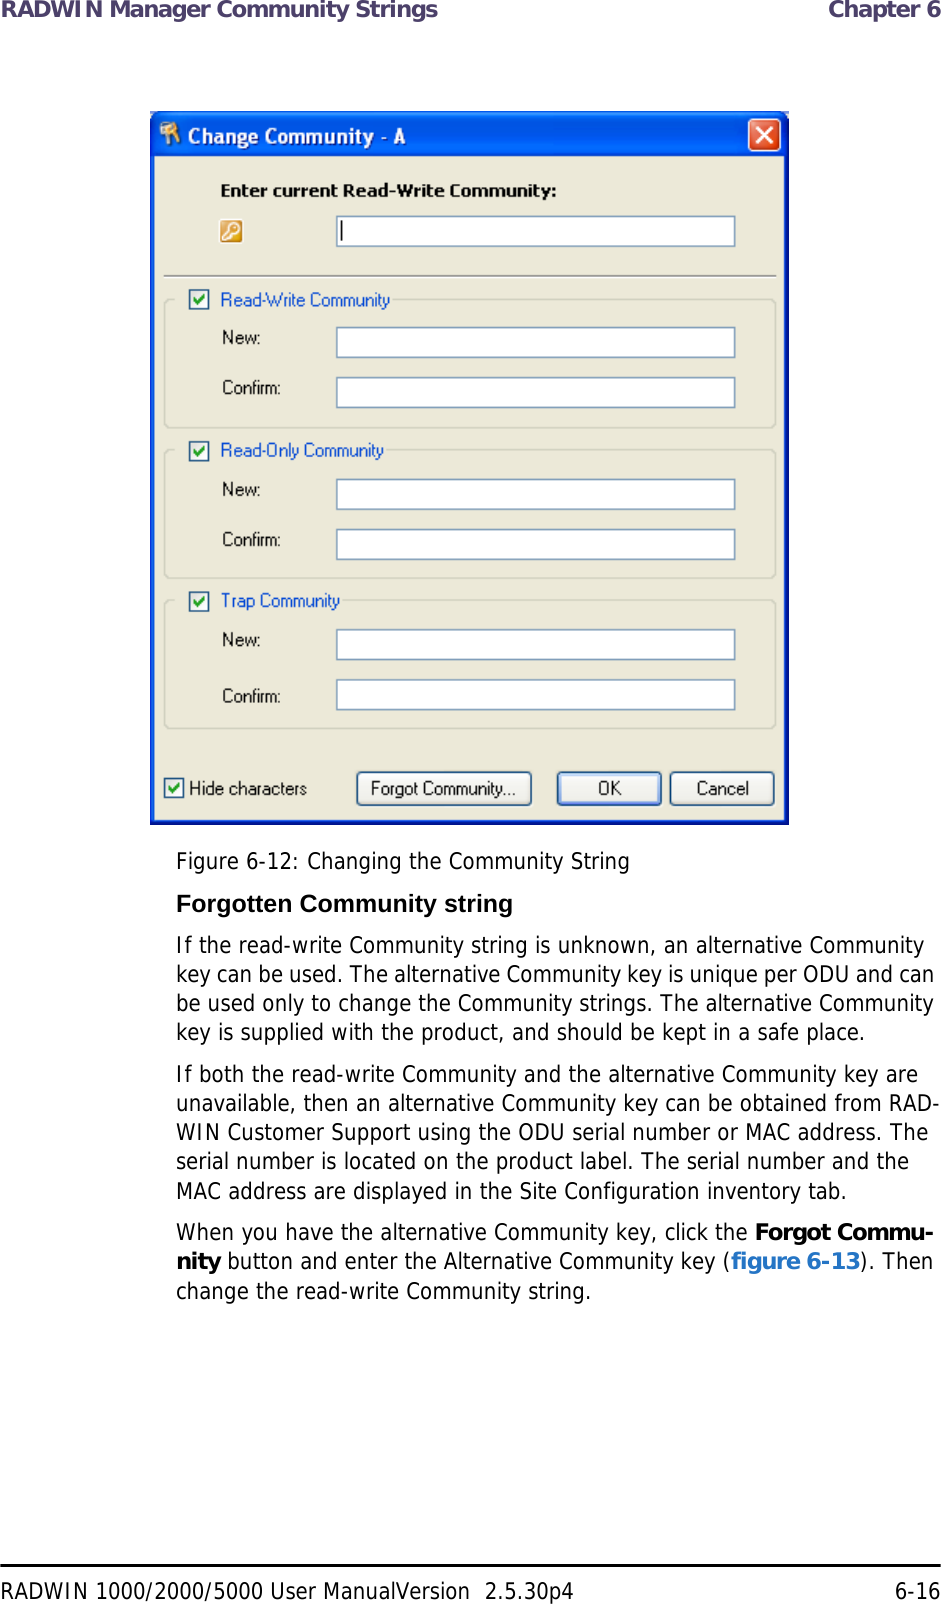 RADWIN Manager Community Strings  Chapter 6RADWIN 1000/2000/5000 User ManualVersion  2.5.30p4 6-16Figure 6-12: Changing the Community StringForgotten Community stringIf the read-write Community string is unknown, an alternative Community key can be used. The alternative Community key is unique per ODU and can be used only to change the Community strings. The alternative Community key is supplied with the product, and should be kept in a safe place. If both the read-write Community and the alternative Community key are unavailable, then an alternative Community key can be obtained from RAD-WIN Customer Support using the ODU serial number or MAC address. The serial number is located on the product label. The serial number and the MAC address are displayed in the Site Configuration inventory tab.When you have the alternative Community key, click the Forgot Commu-nity button and enter the Alternative Community key (figure 6-13). Then change the read-write Community string.